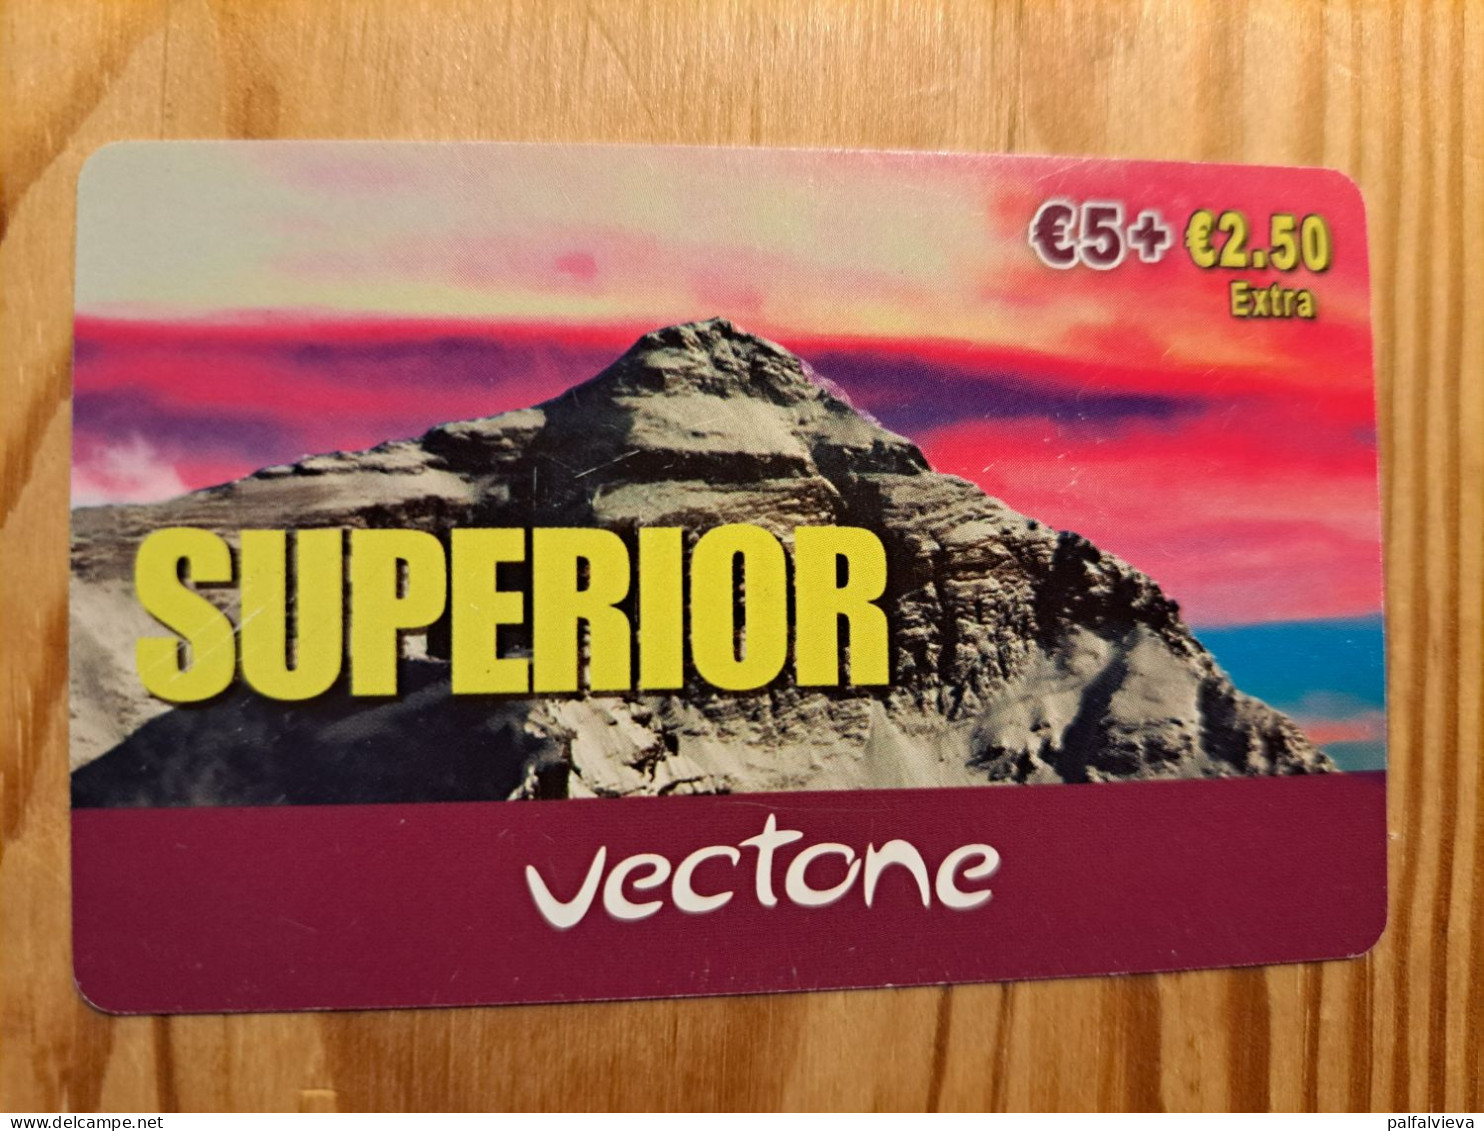 Prepaid Phonecard Germany, Vectone, Superior - Mountain - [2] Mobile Phones, Refills And Prepaid Cards